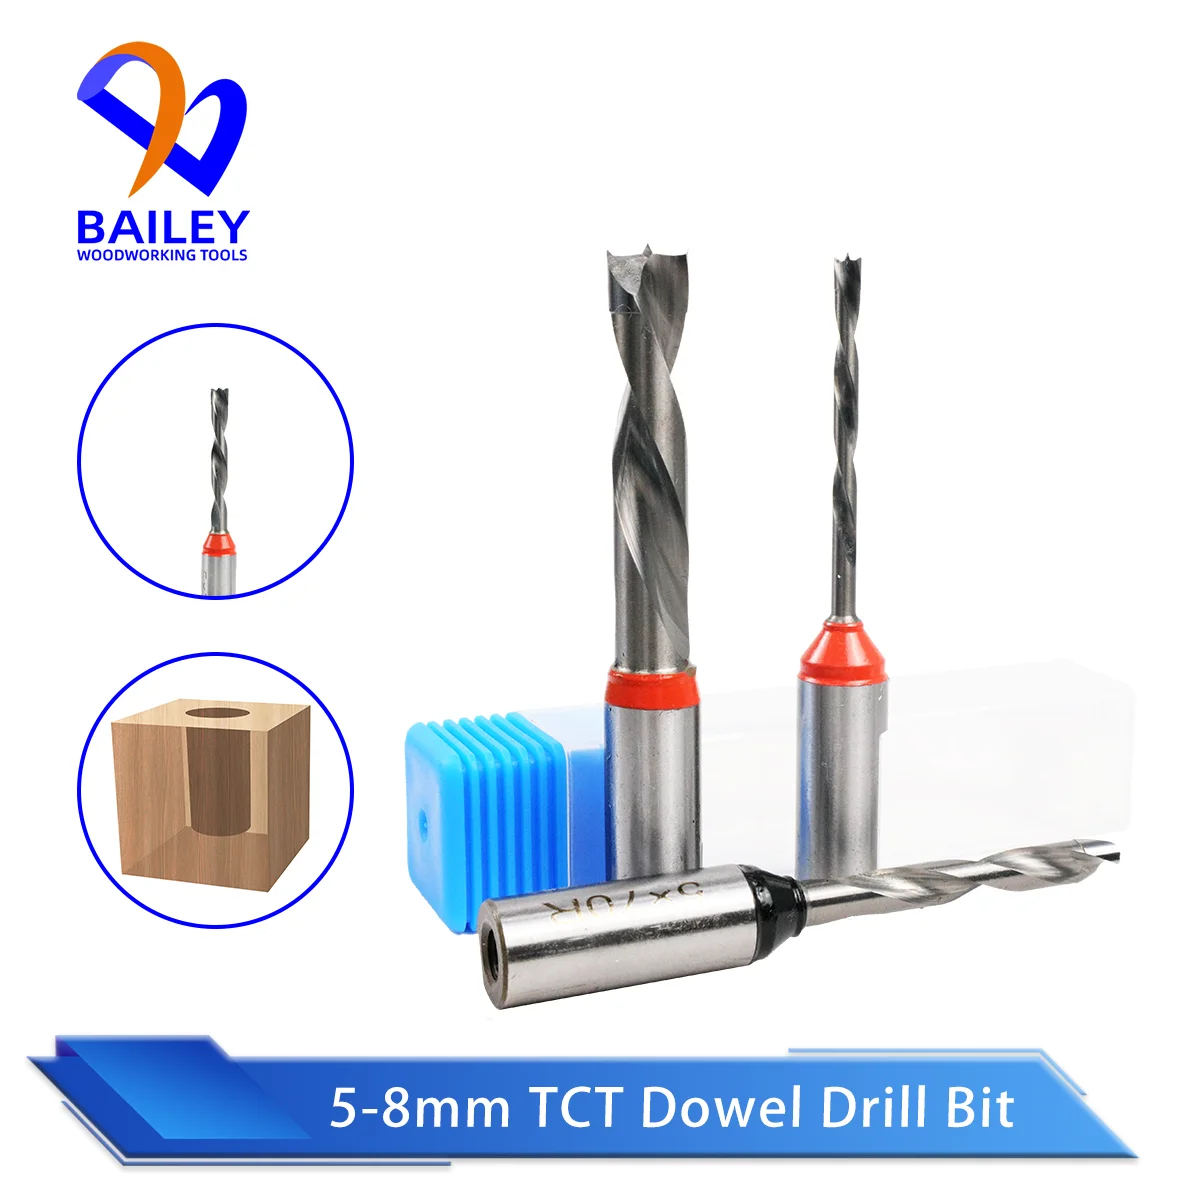 BAILEY 1PC TCT Dowel Drill Bits Woodworking Drilling Bit CNC Router Bit 5-8mm Hole Making Boring 70/57mm Length Hard Metal Drill